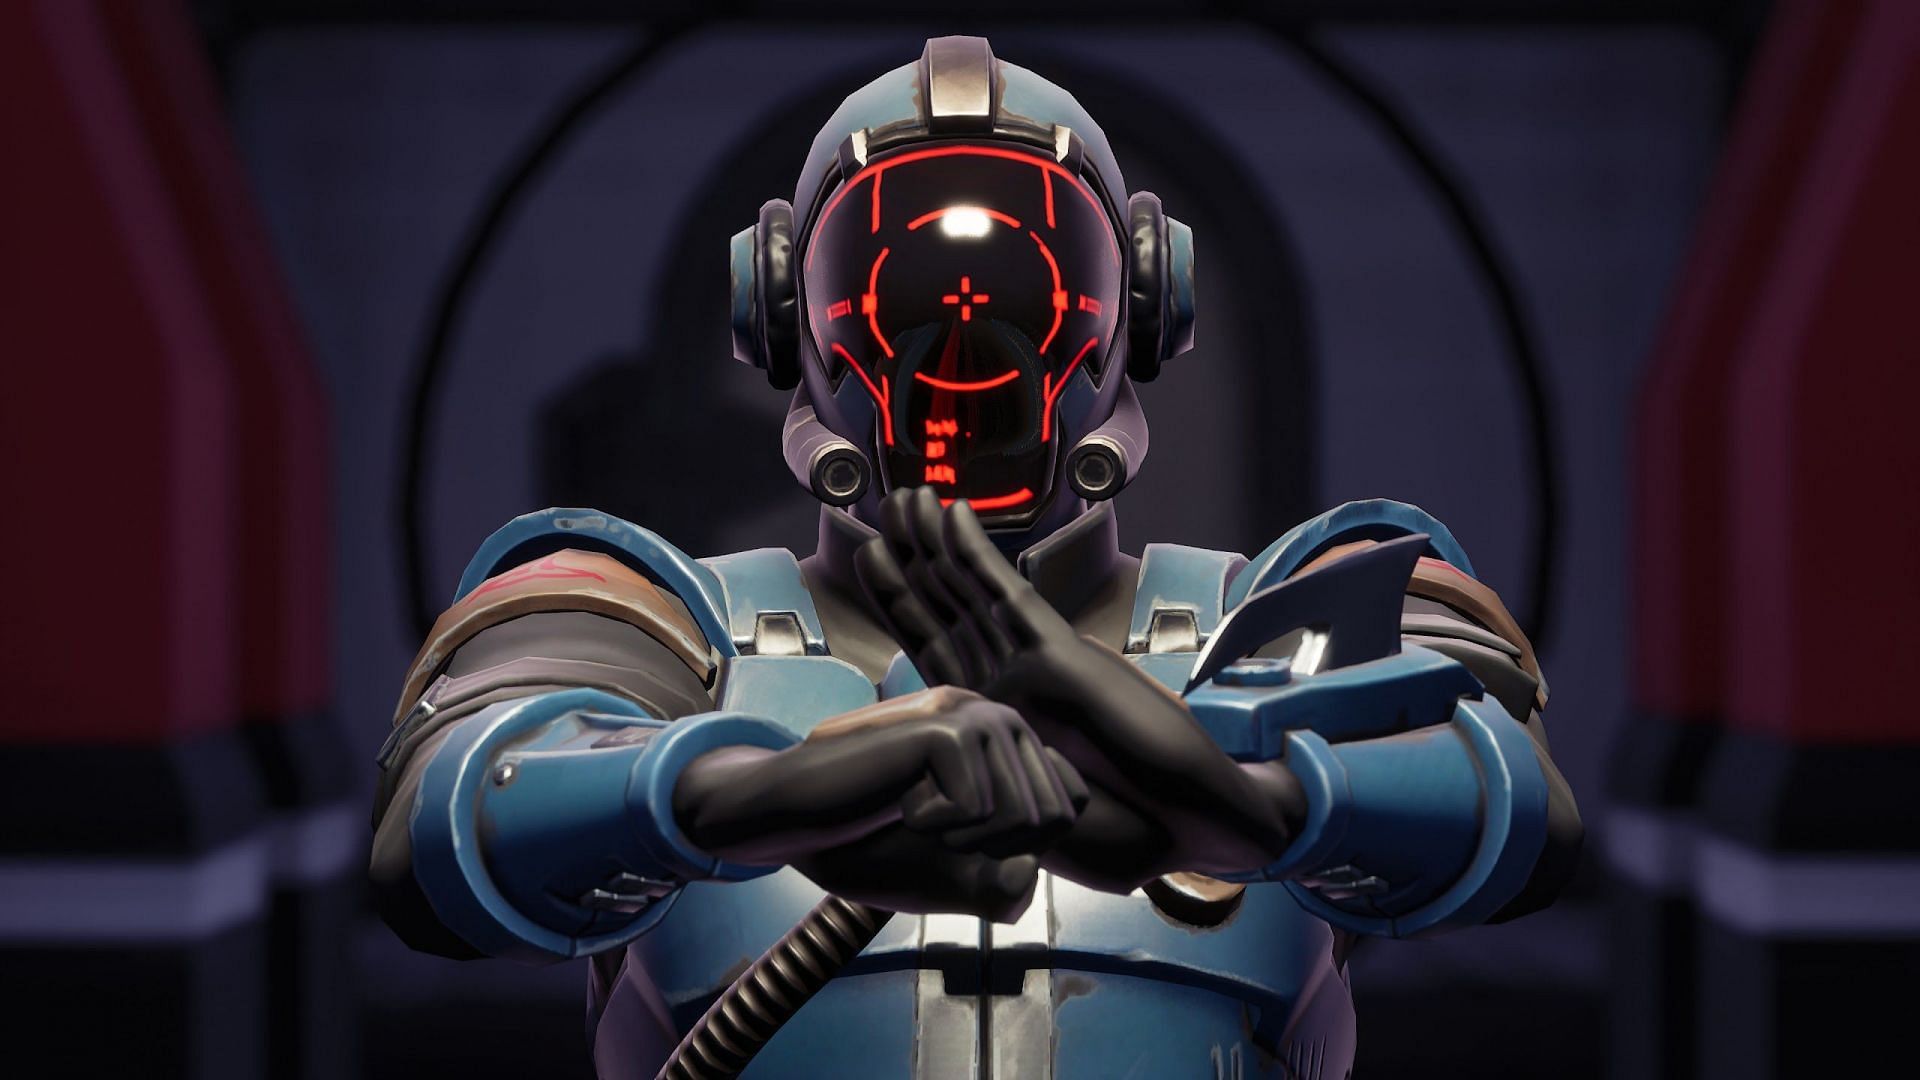 The Visitor is the first member of The Seven in Fortnite (Image via Epic Games)